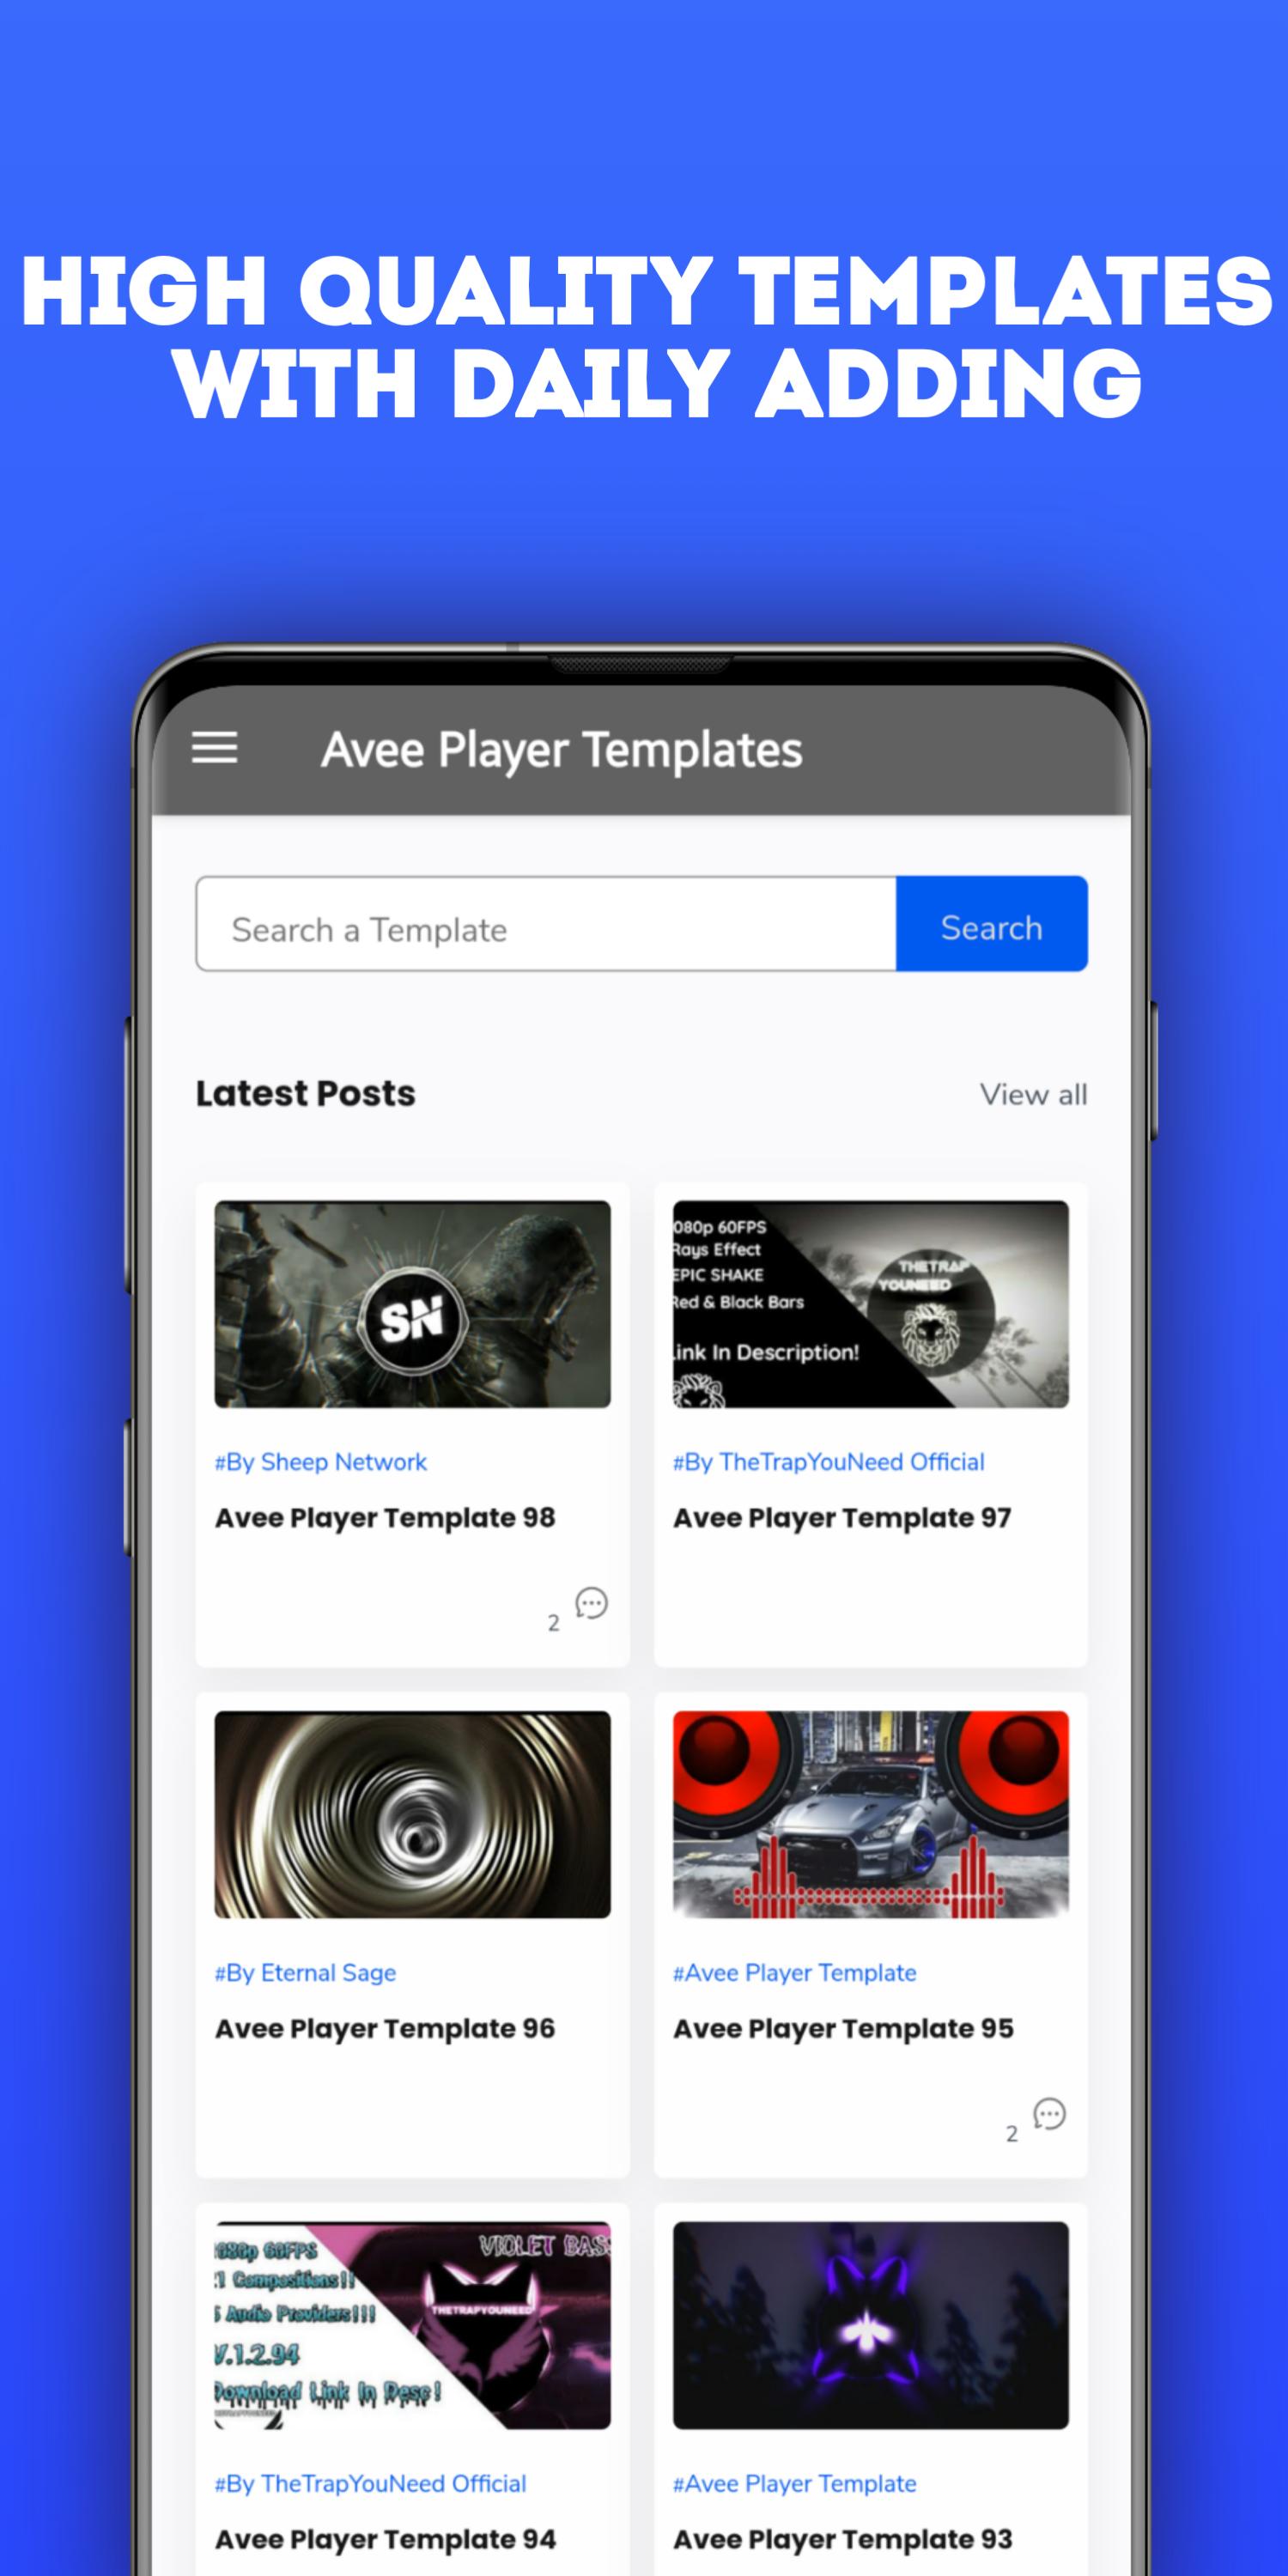 Avee Player Template - High-Quality Templates